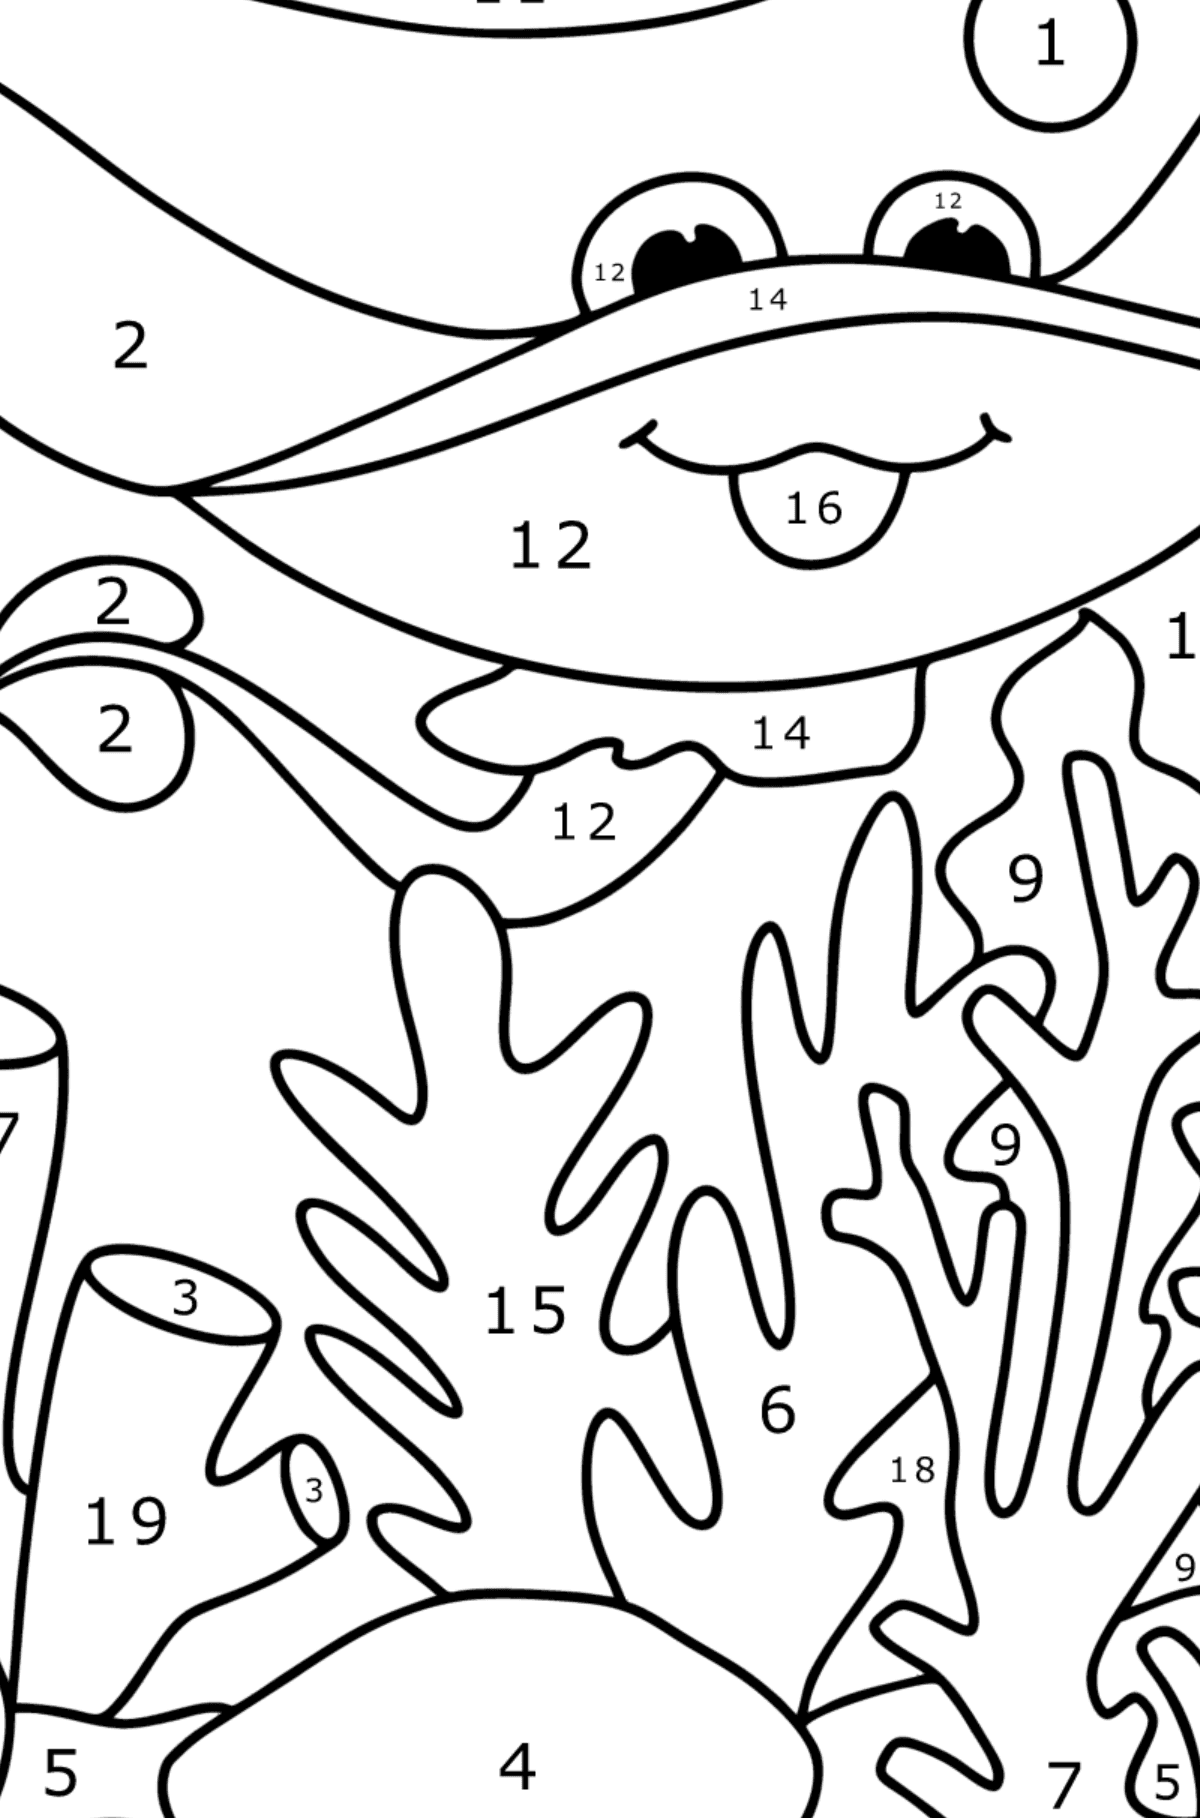 Stingray coloring page - Coloring by Numbers for Kids